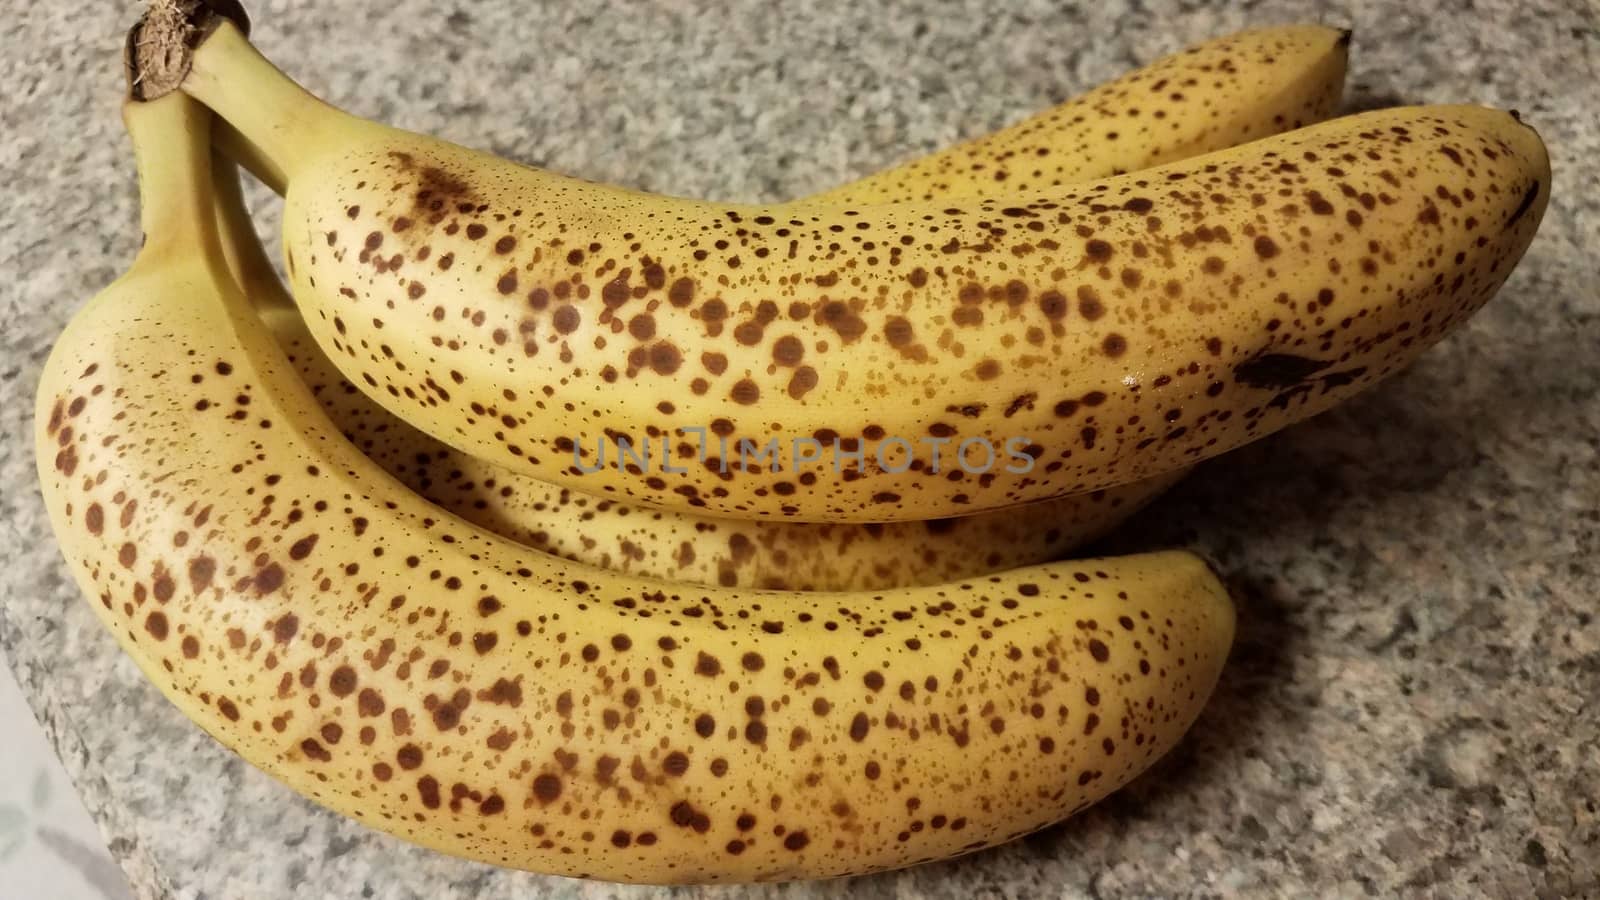 ripe banana fruit with spots on counter by stockphotofan1